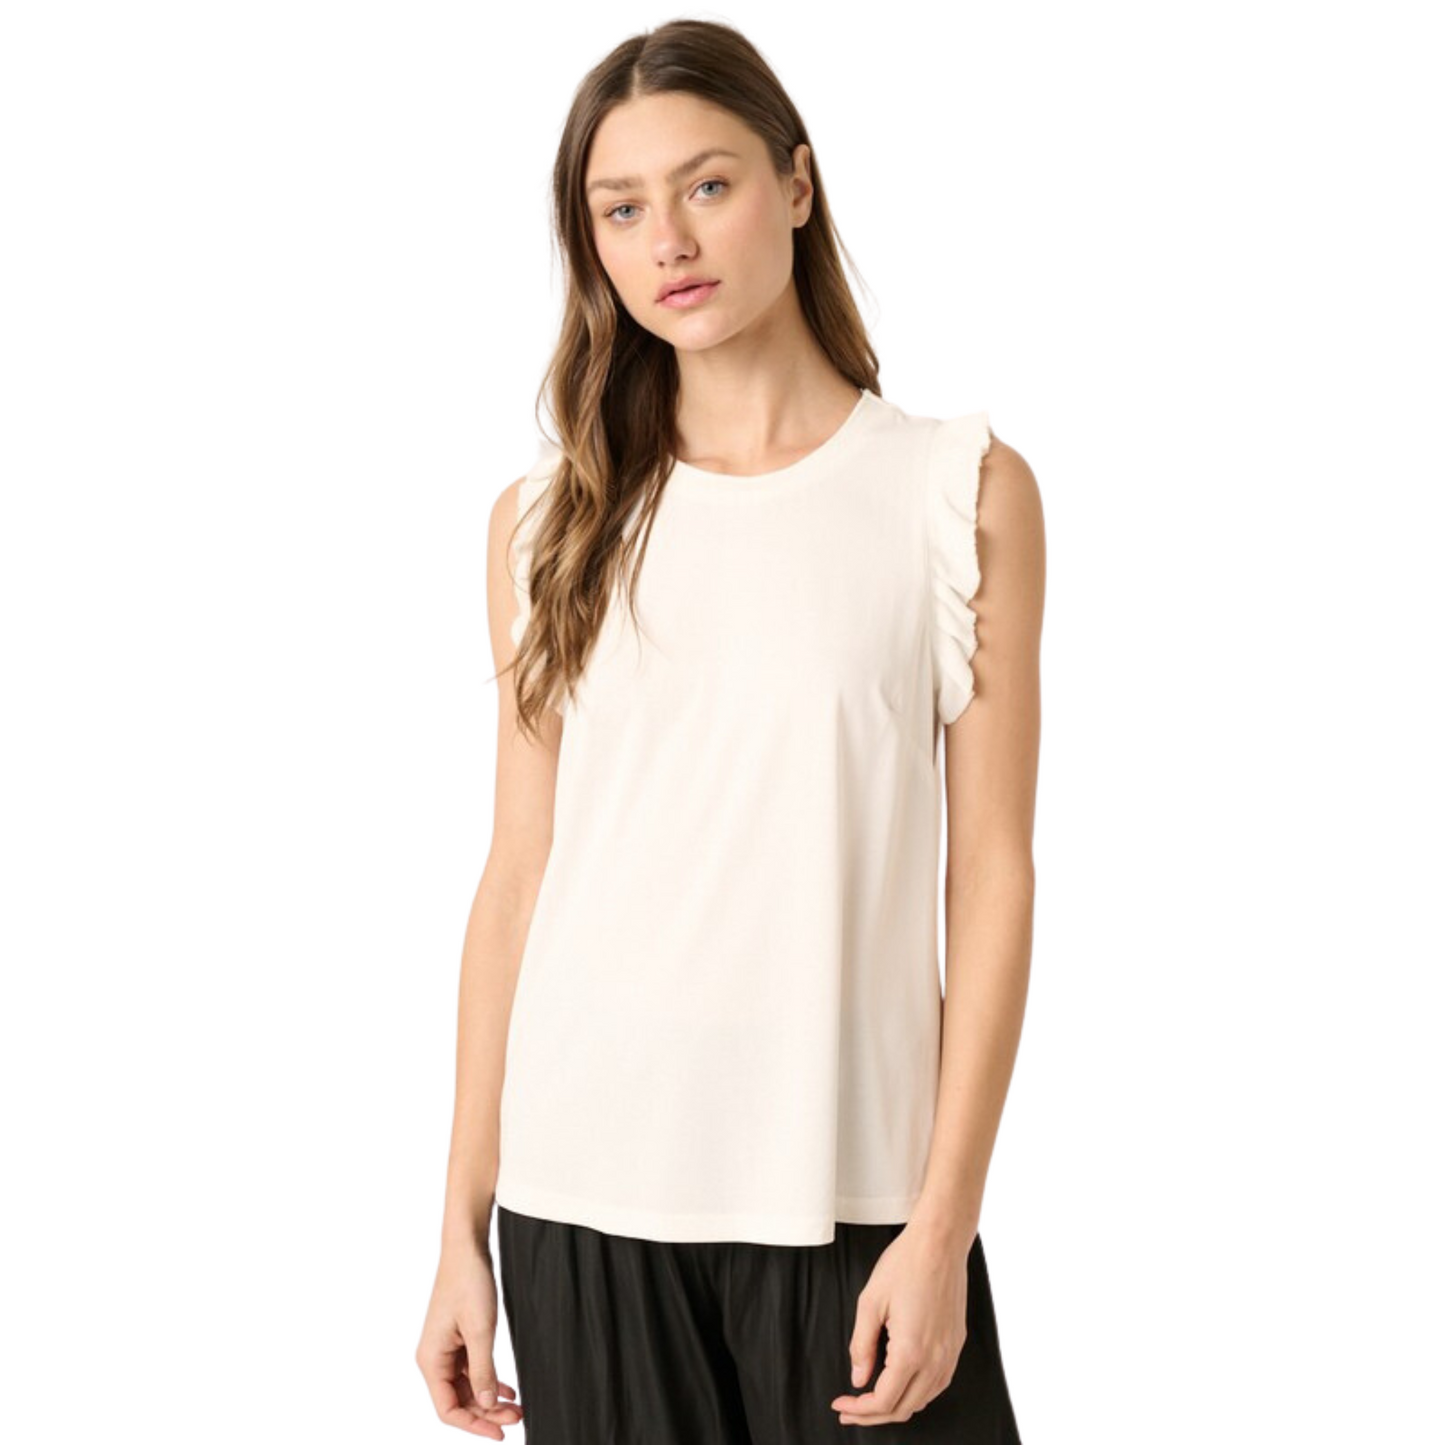 Ruffle trim cupro knit top in ivory